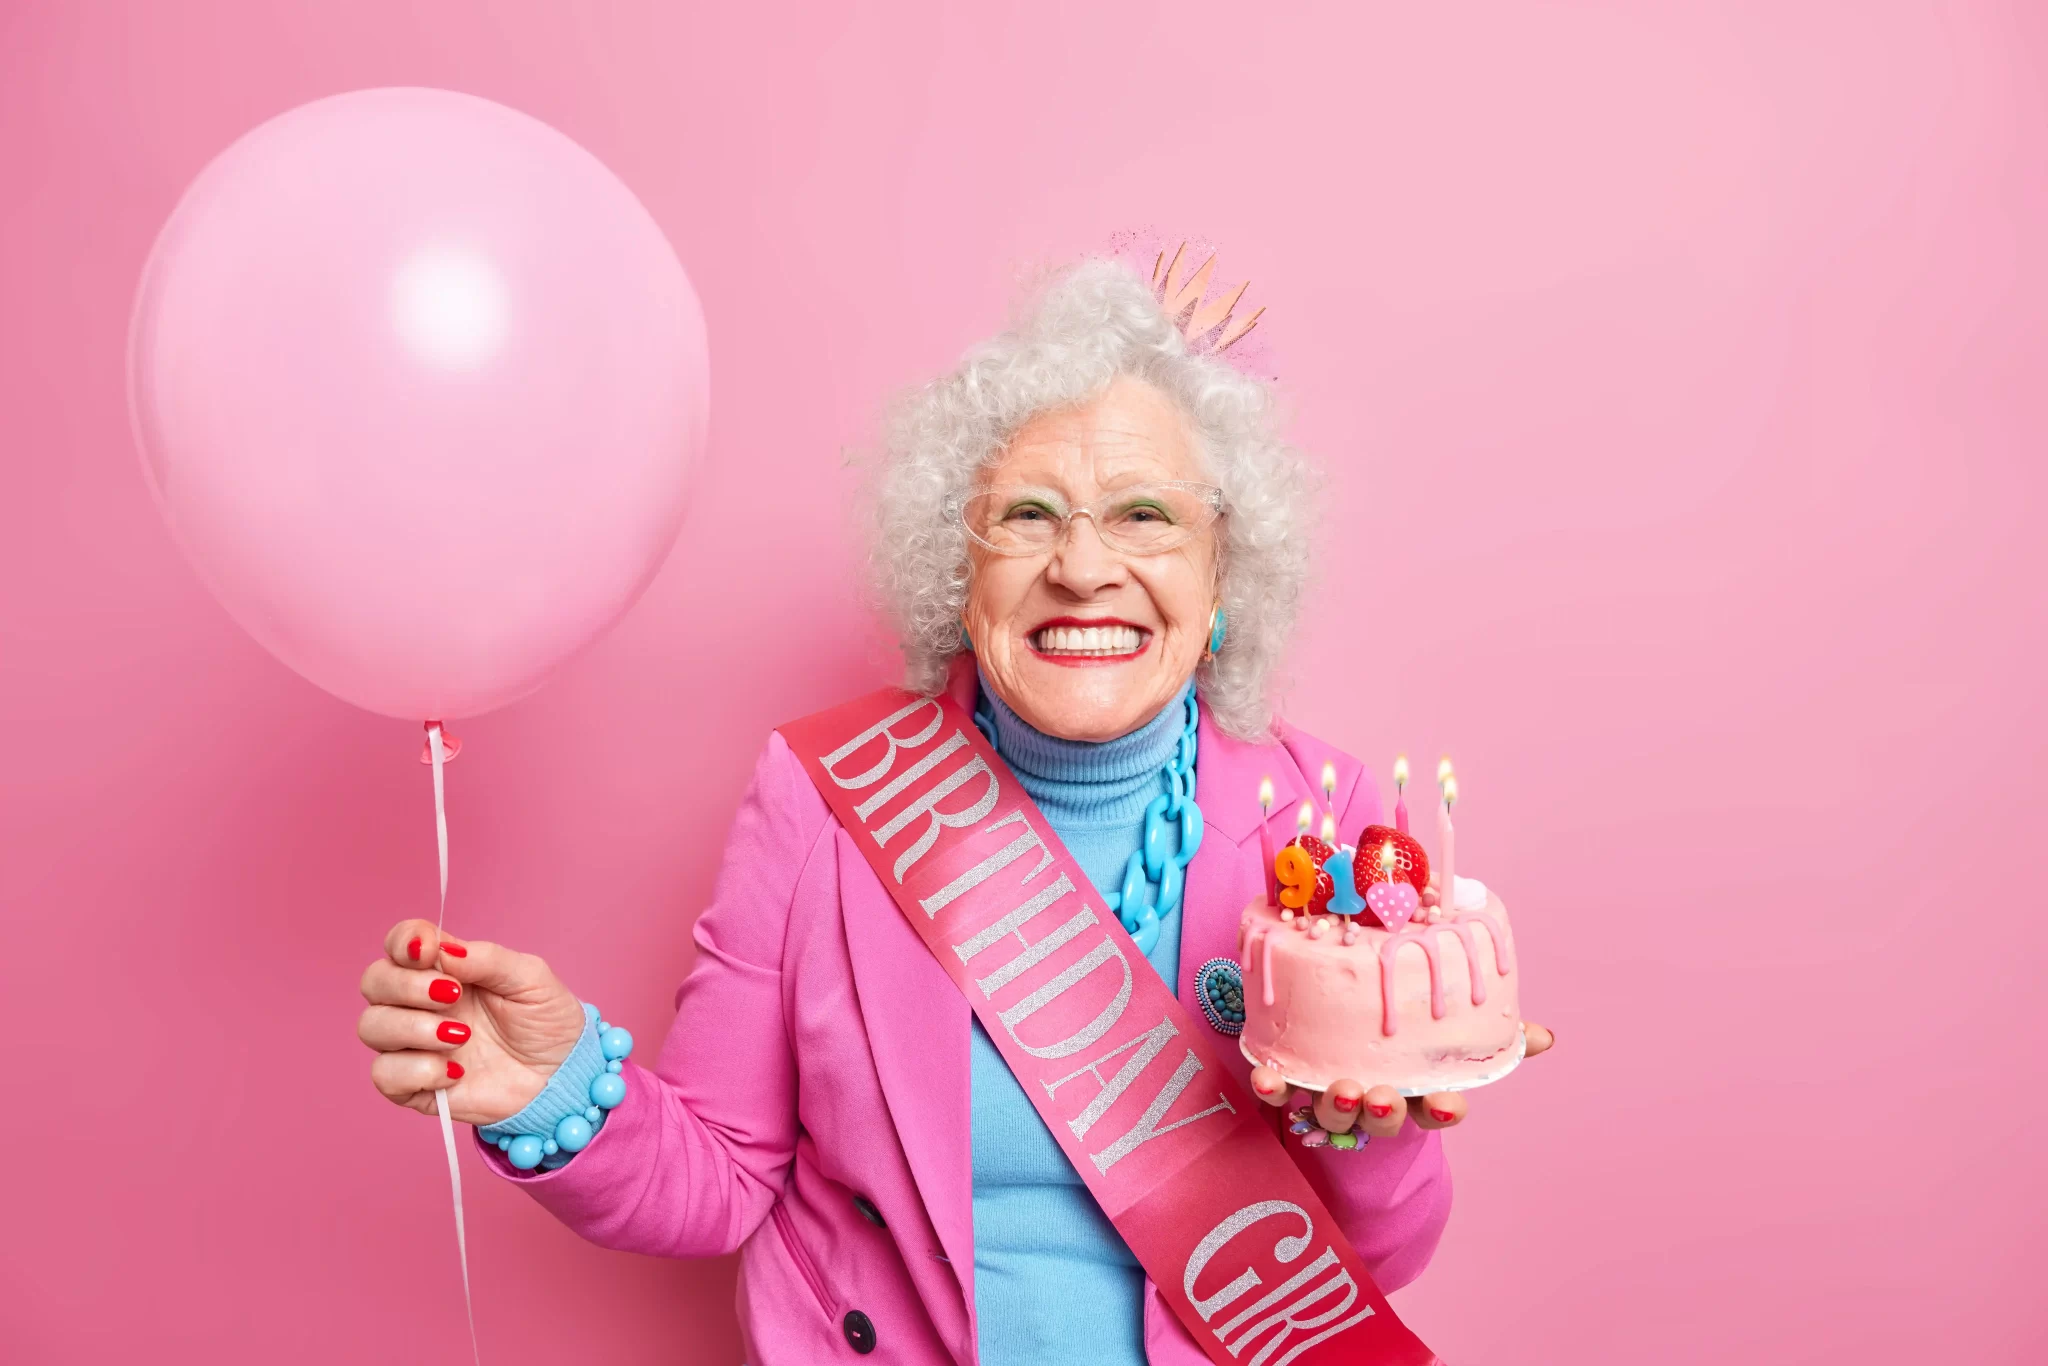 studio-shot-of-happy-wrinkled-female-pensioner-with-bright-makeup-smiles-toothily-holds-festive-cake-with-burning-candles-has-festive-mood-carries-inflated-balloon